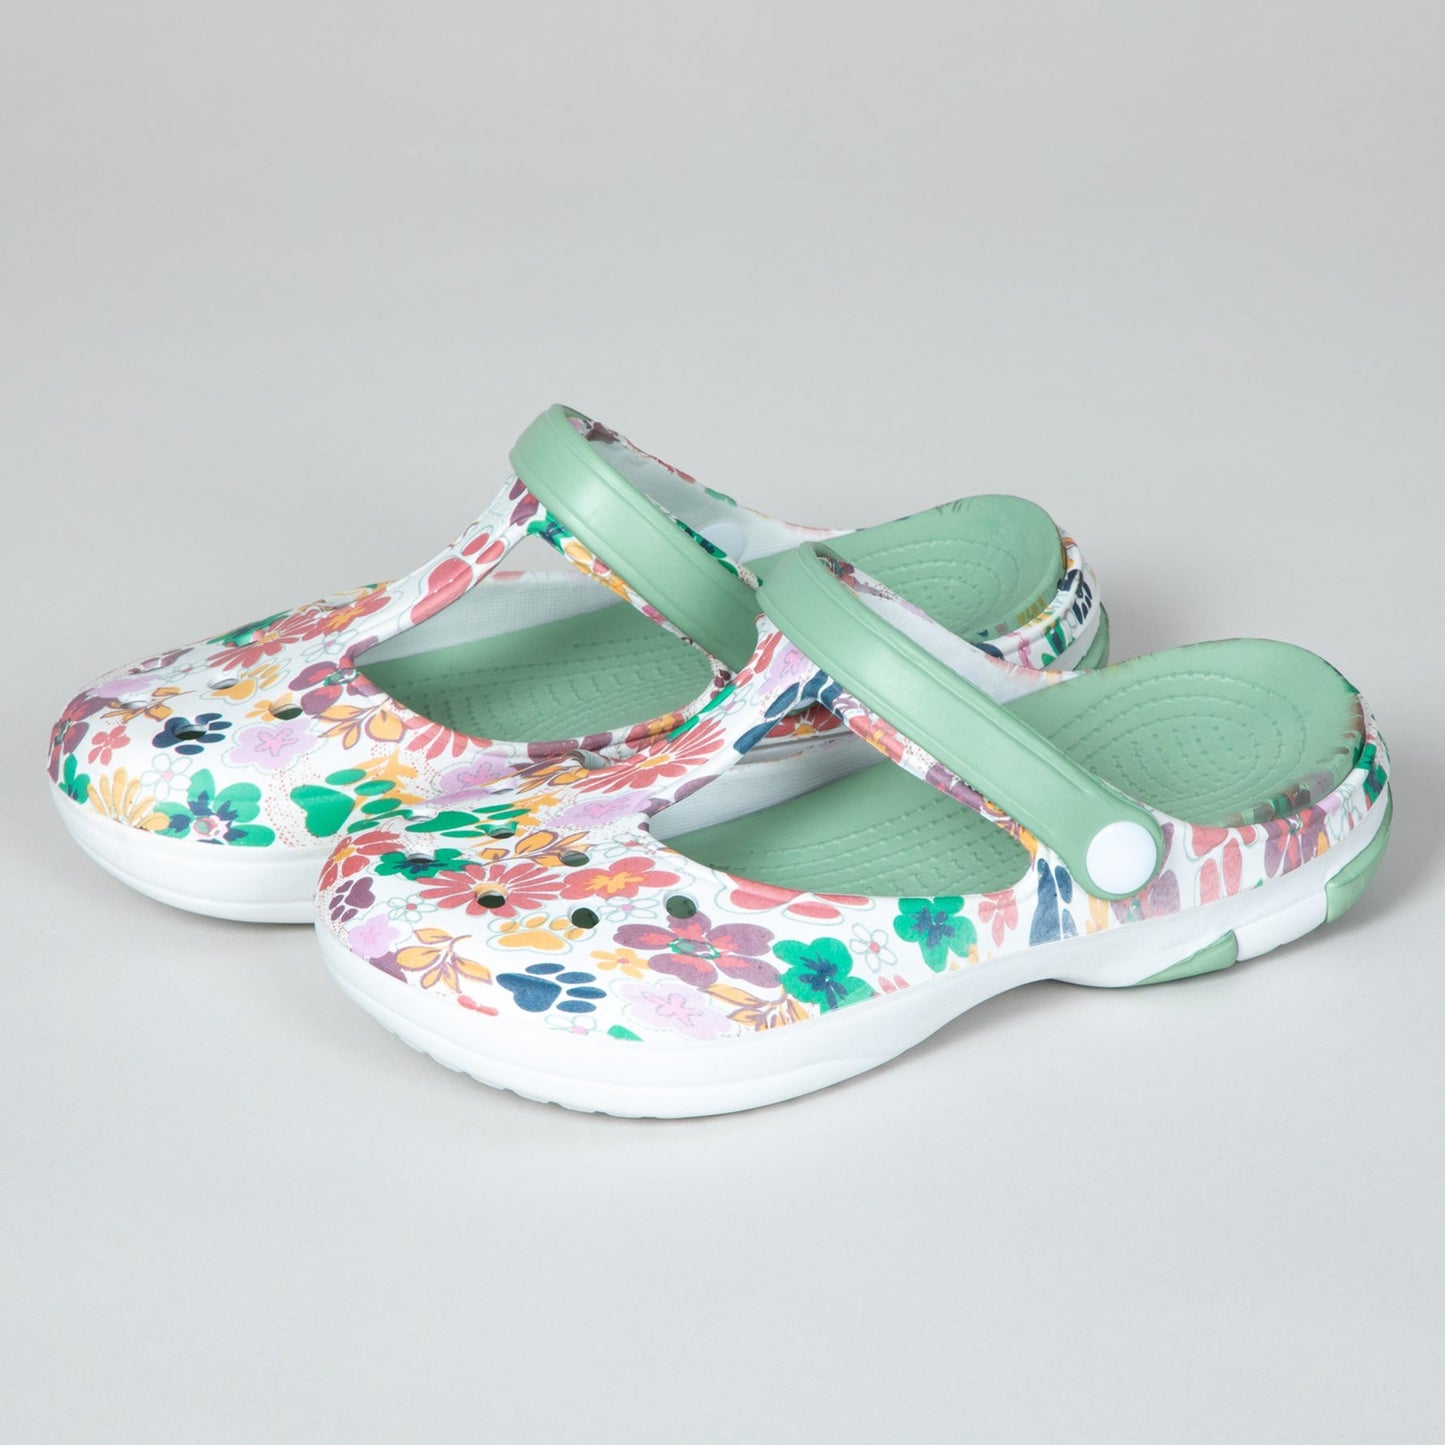 Multicolored Mary Jane Clogs